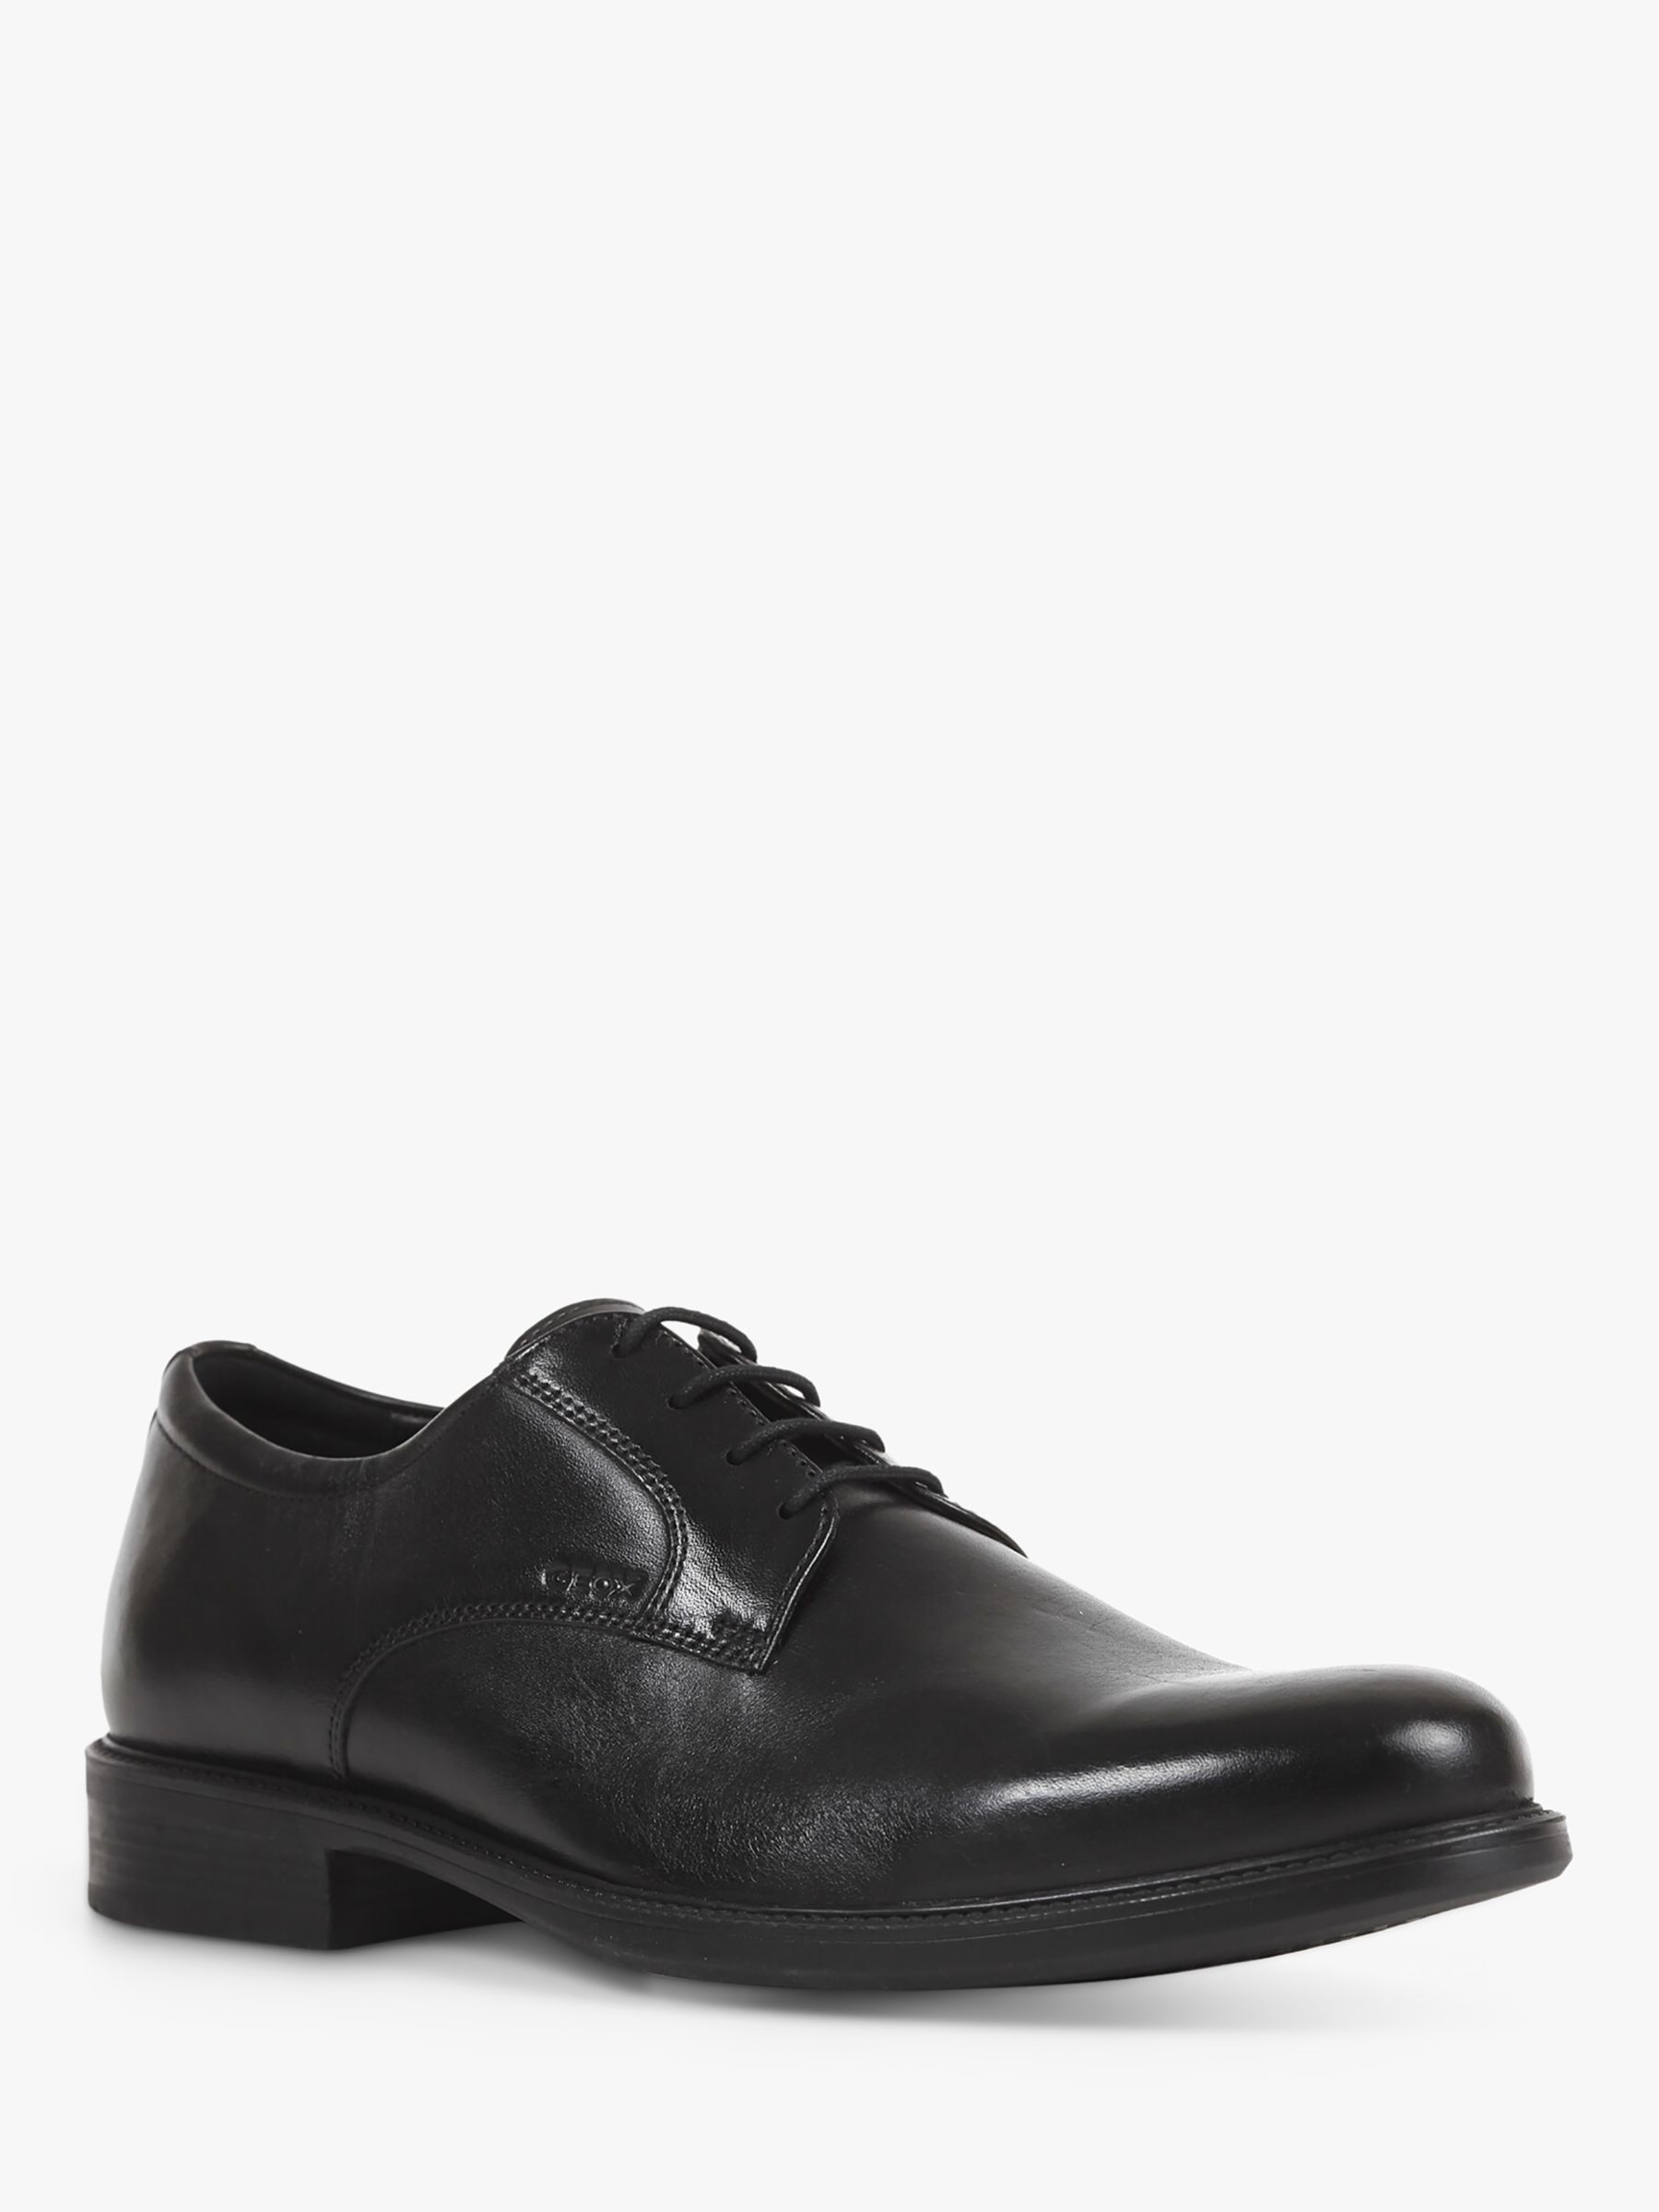 Esquiar Deslumbrante Alivio Geox Carnaby Leather Lace Up Derby Shoes, Black at John Lewis & Partners